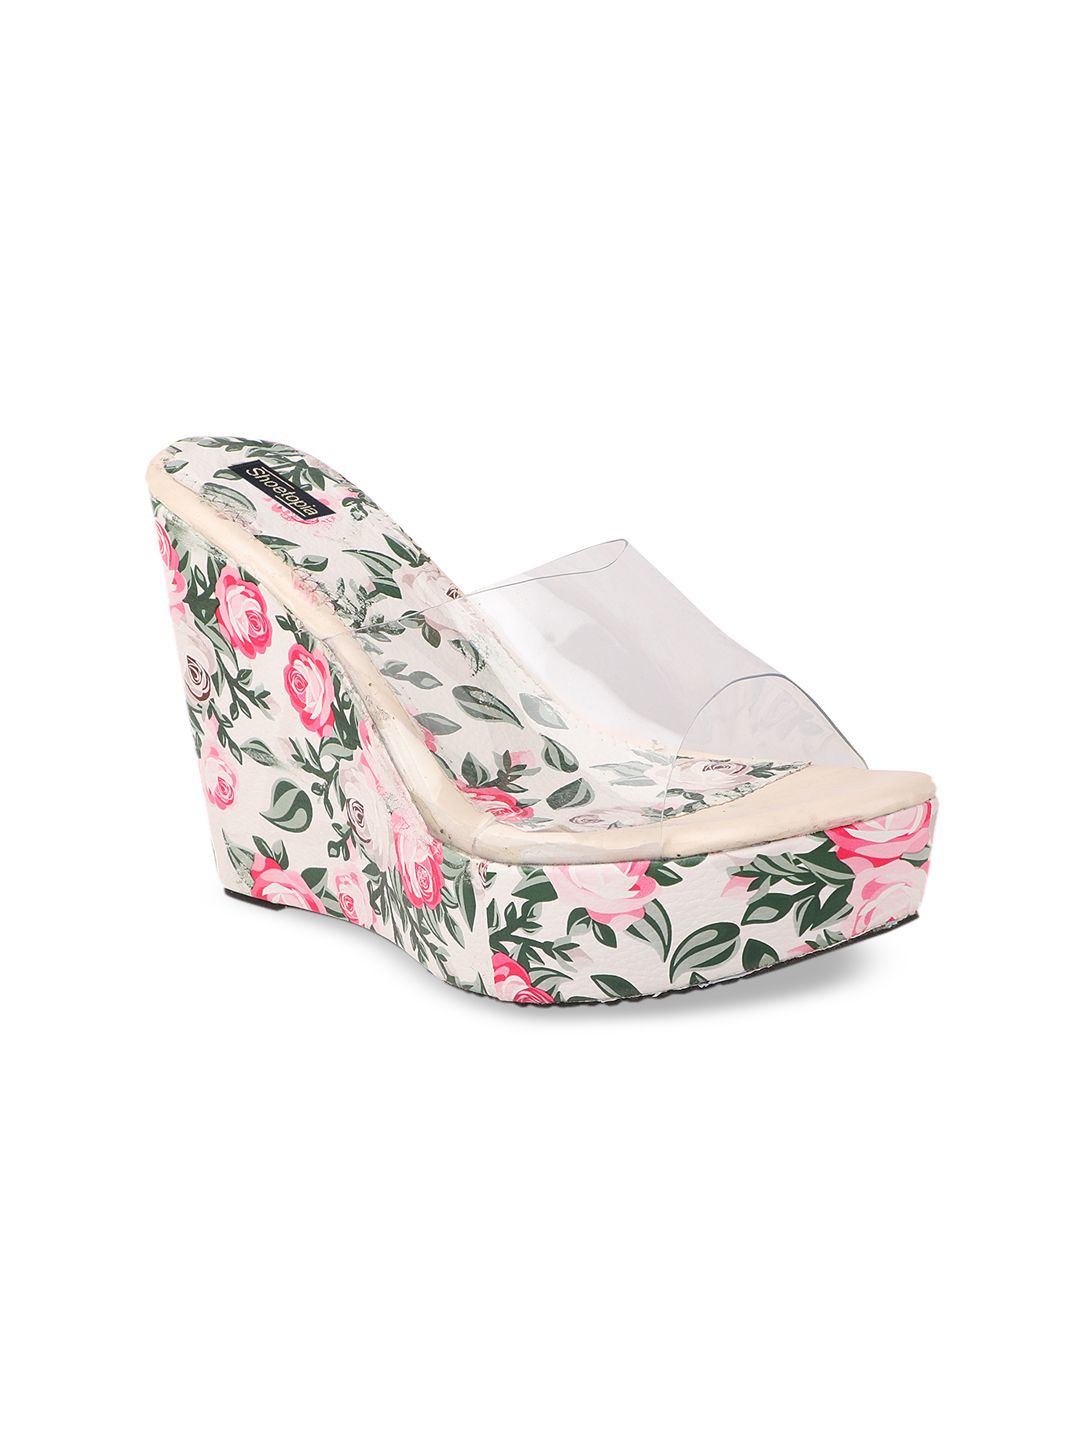 Shoetopia White & Purple Floral Printed Wedge Sandals Price in India